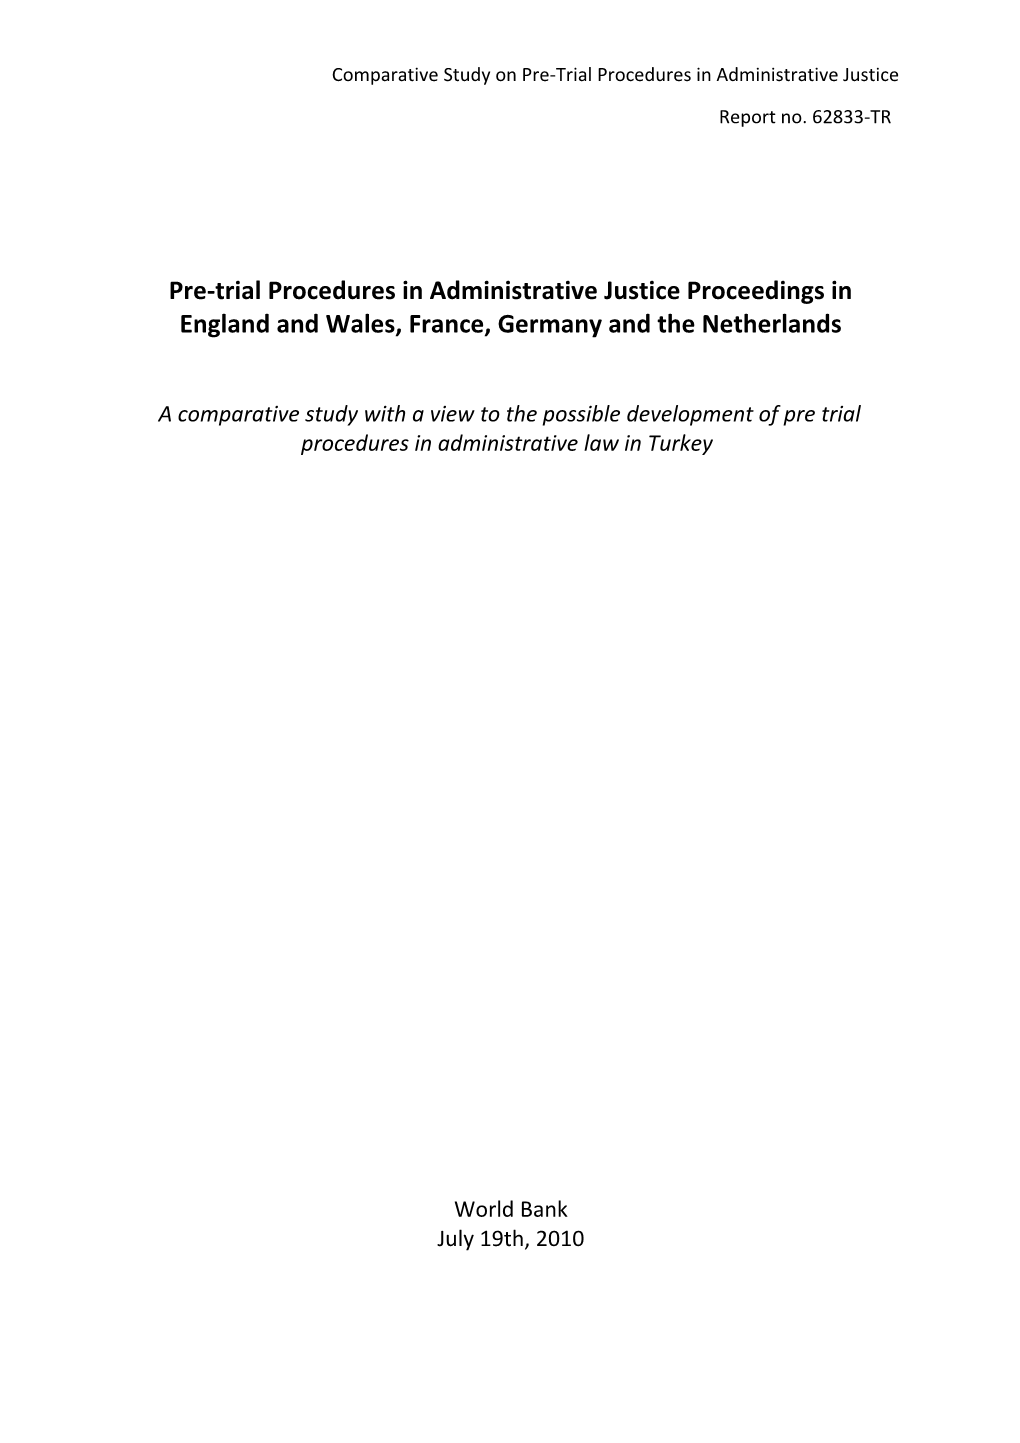 Administrative Pre-Trial Proceedings in England and Wales, France, Germany and the Netherlands